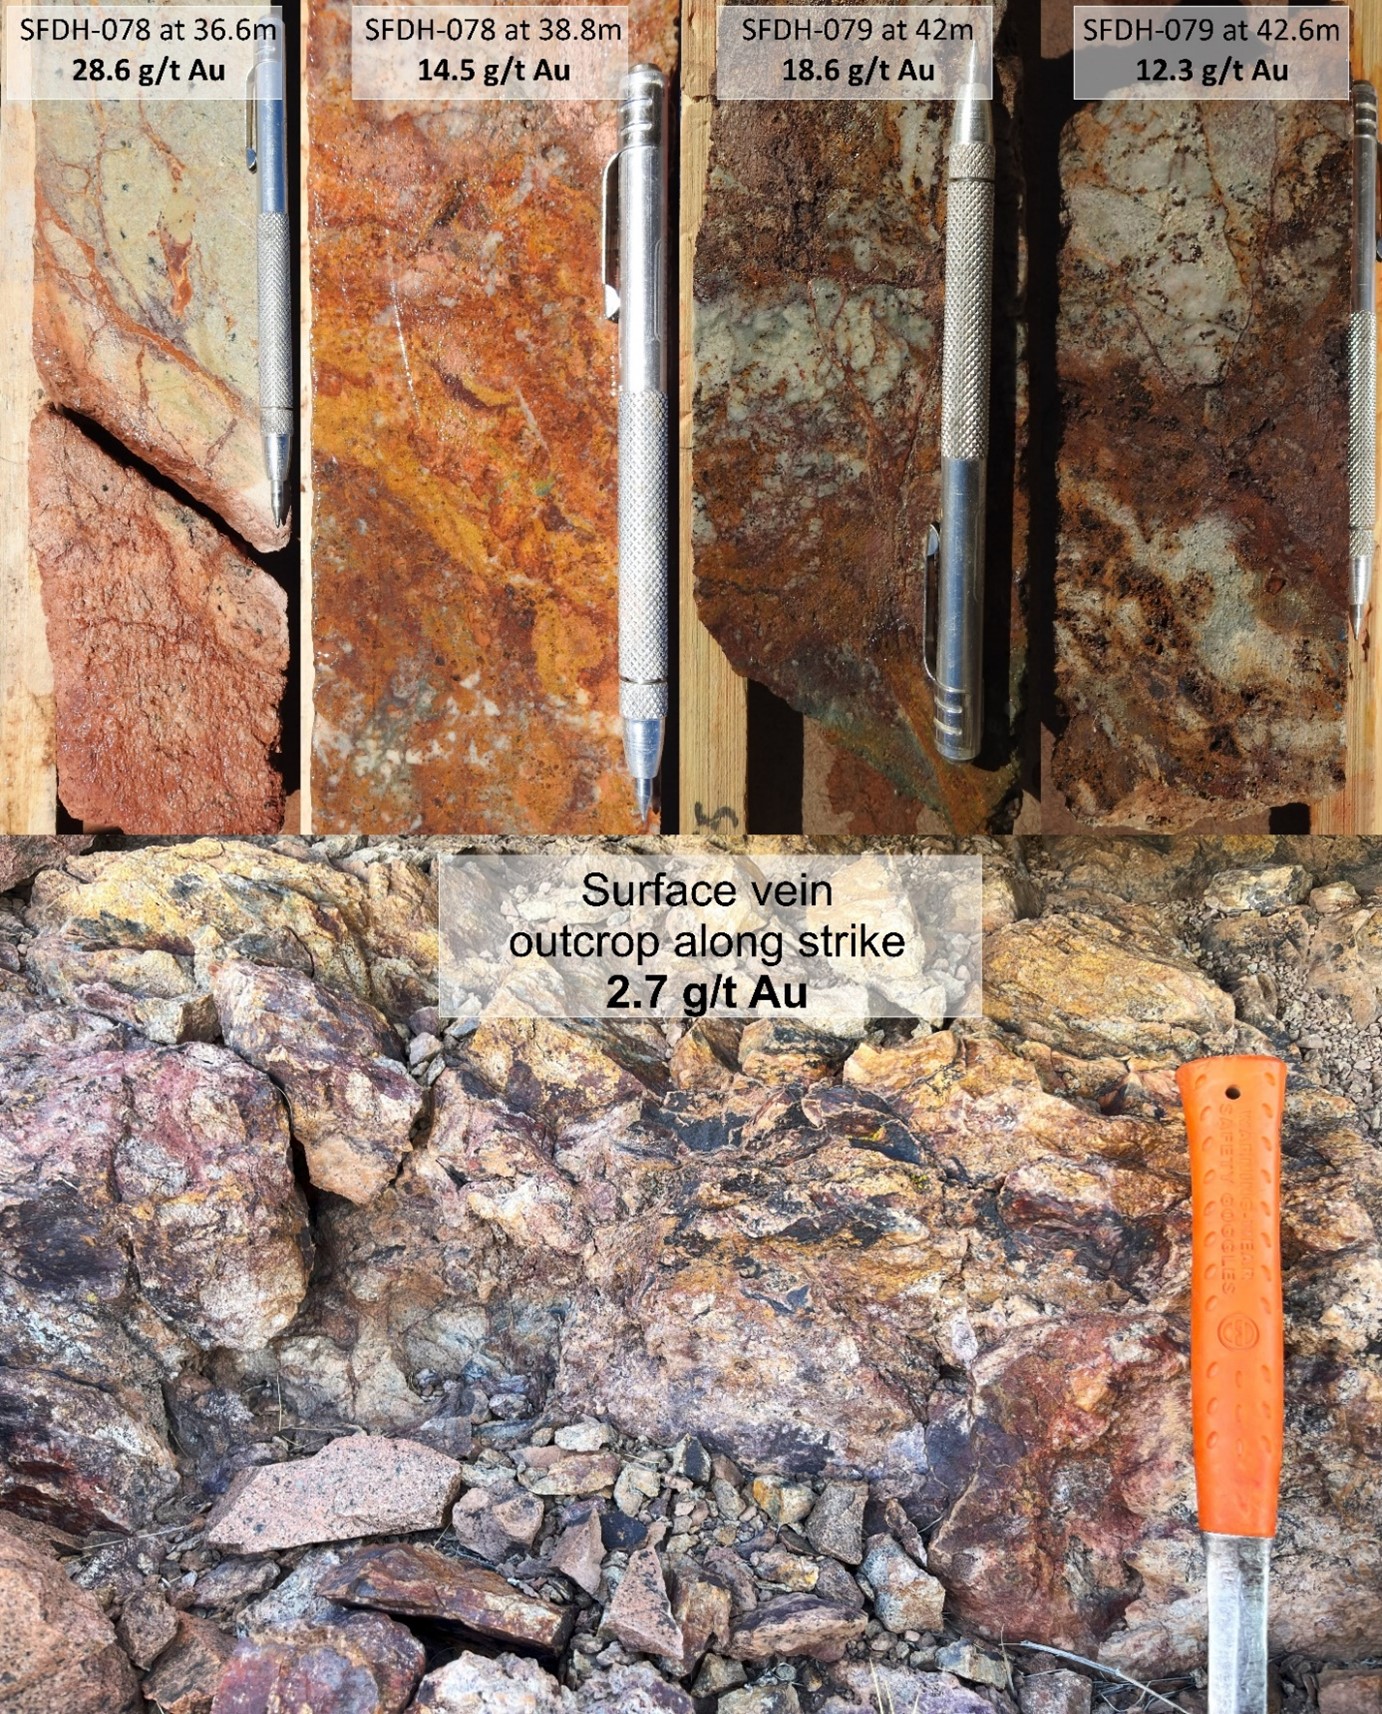 Examples of high-grade gold mineralisation in core samples and from an outcrop along strike from drilling at Veta Rica. Mineralisation is hosted in crystalline quartz (commonly brecciated) with intense sericite alteration and hematite-goethite-jarosite, formed by the weathering of sulphides.